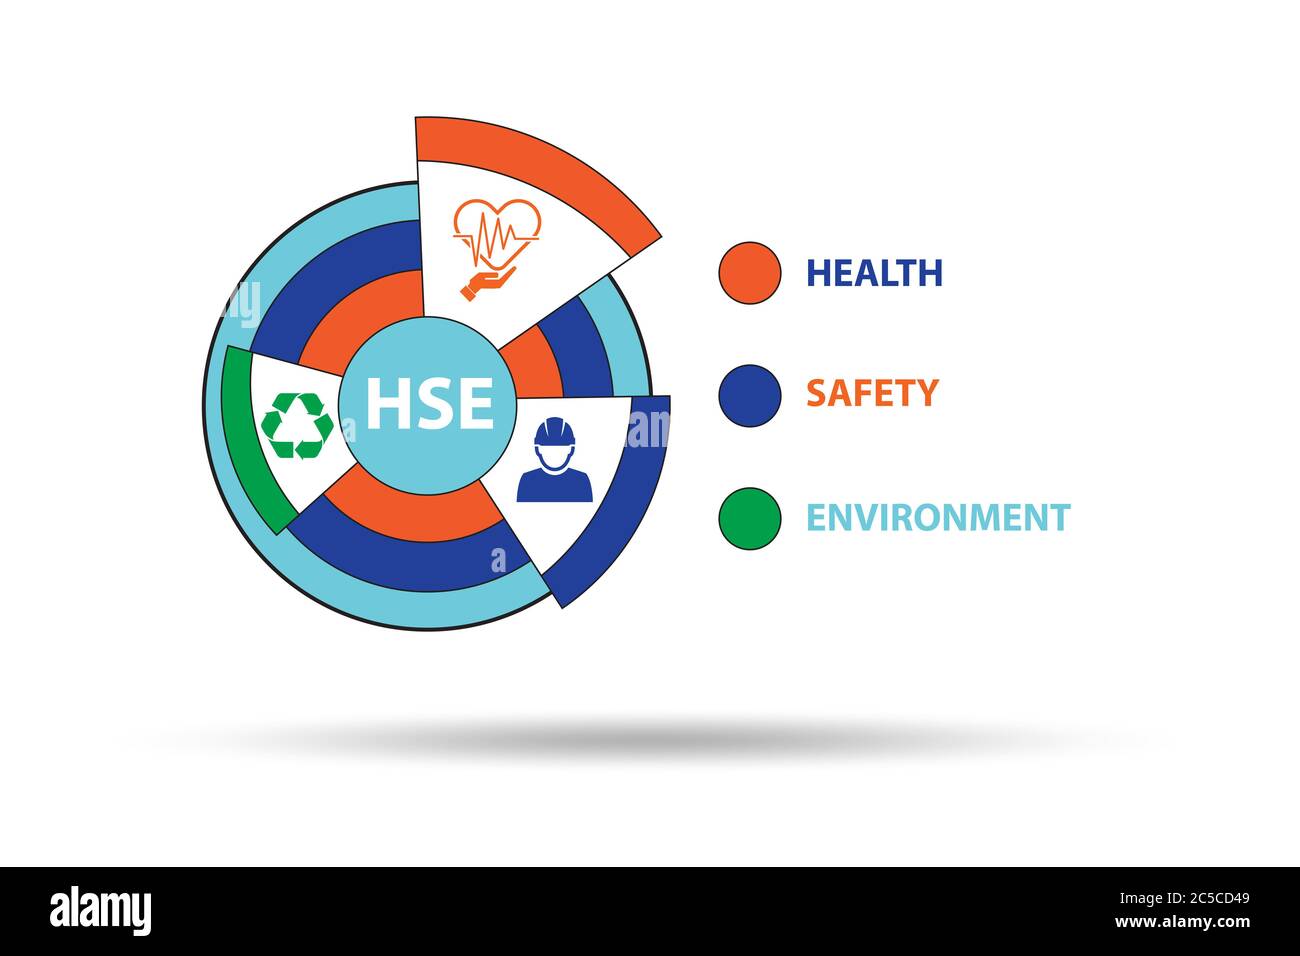 HSE concept for health safety and environment Stock Photo